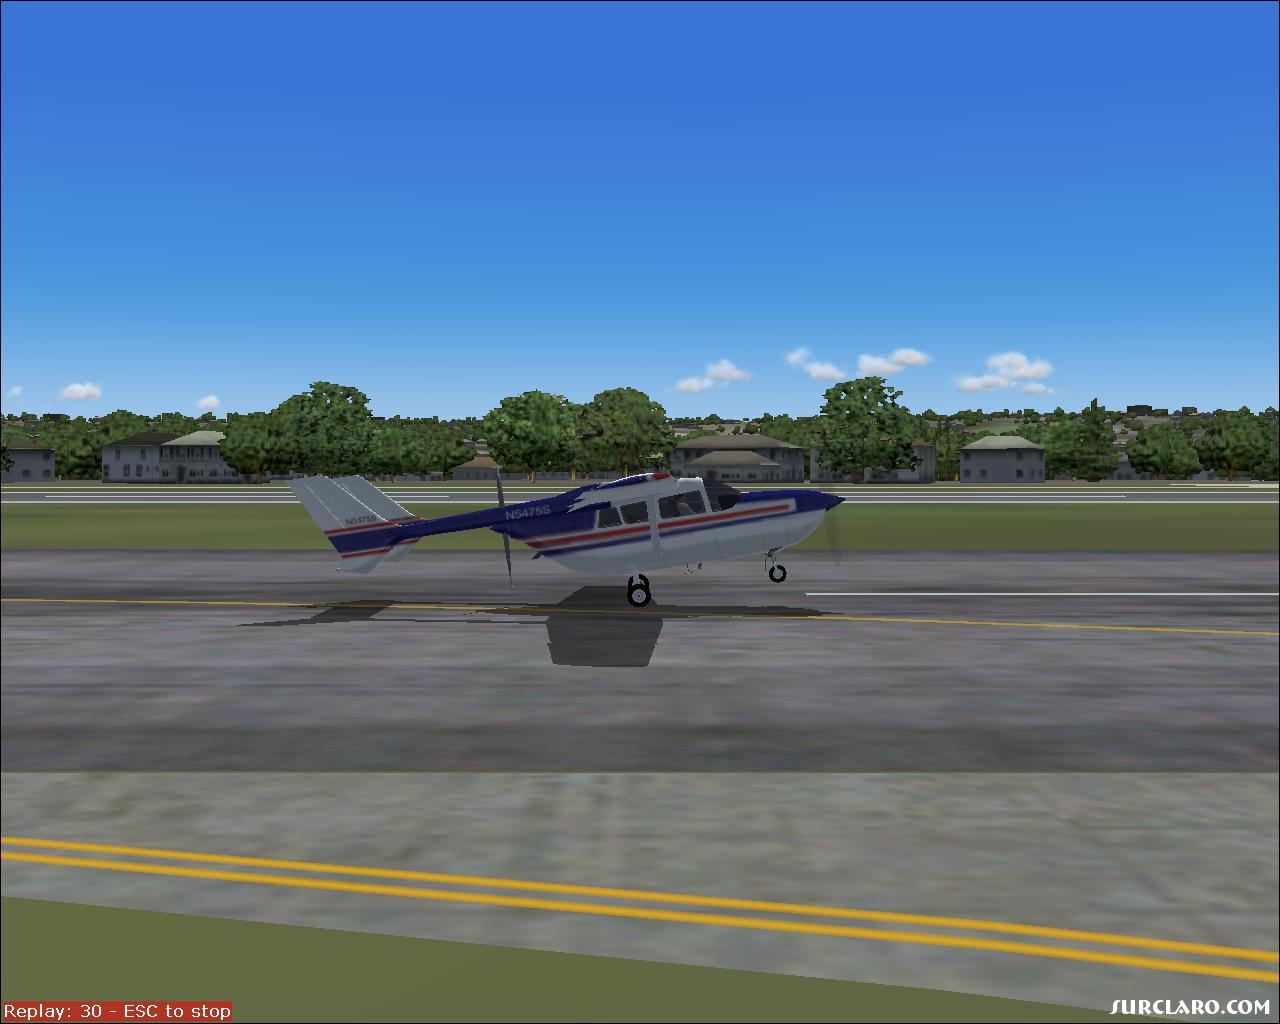 landing at boeing field in a c337 skymaster - Photo 16044